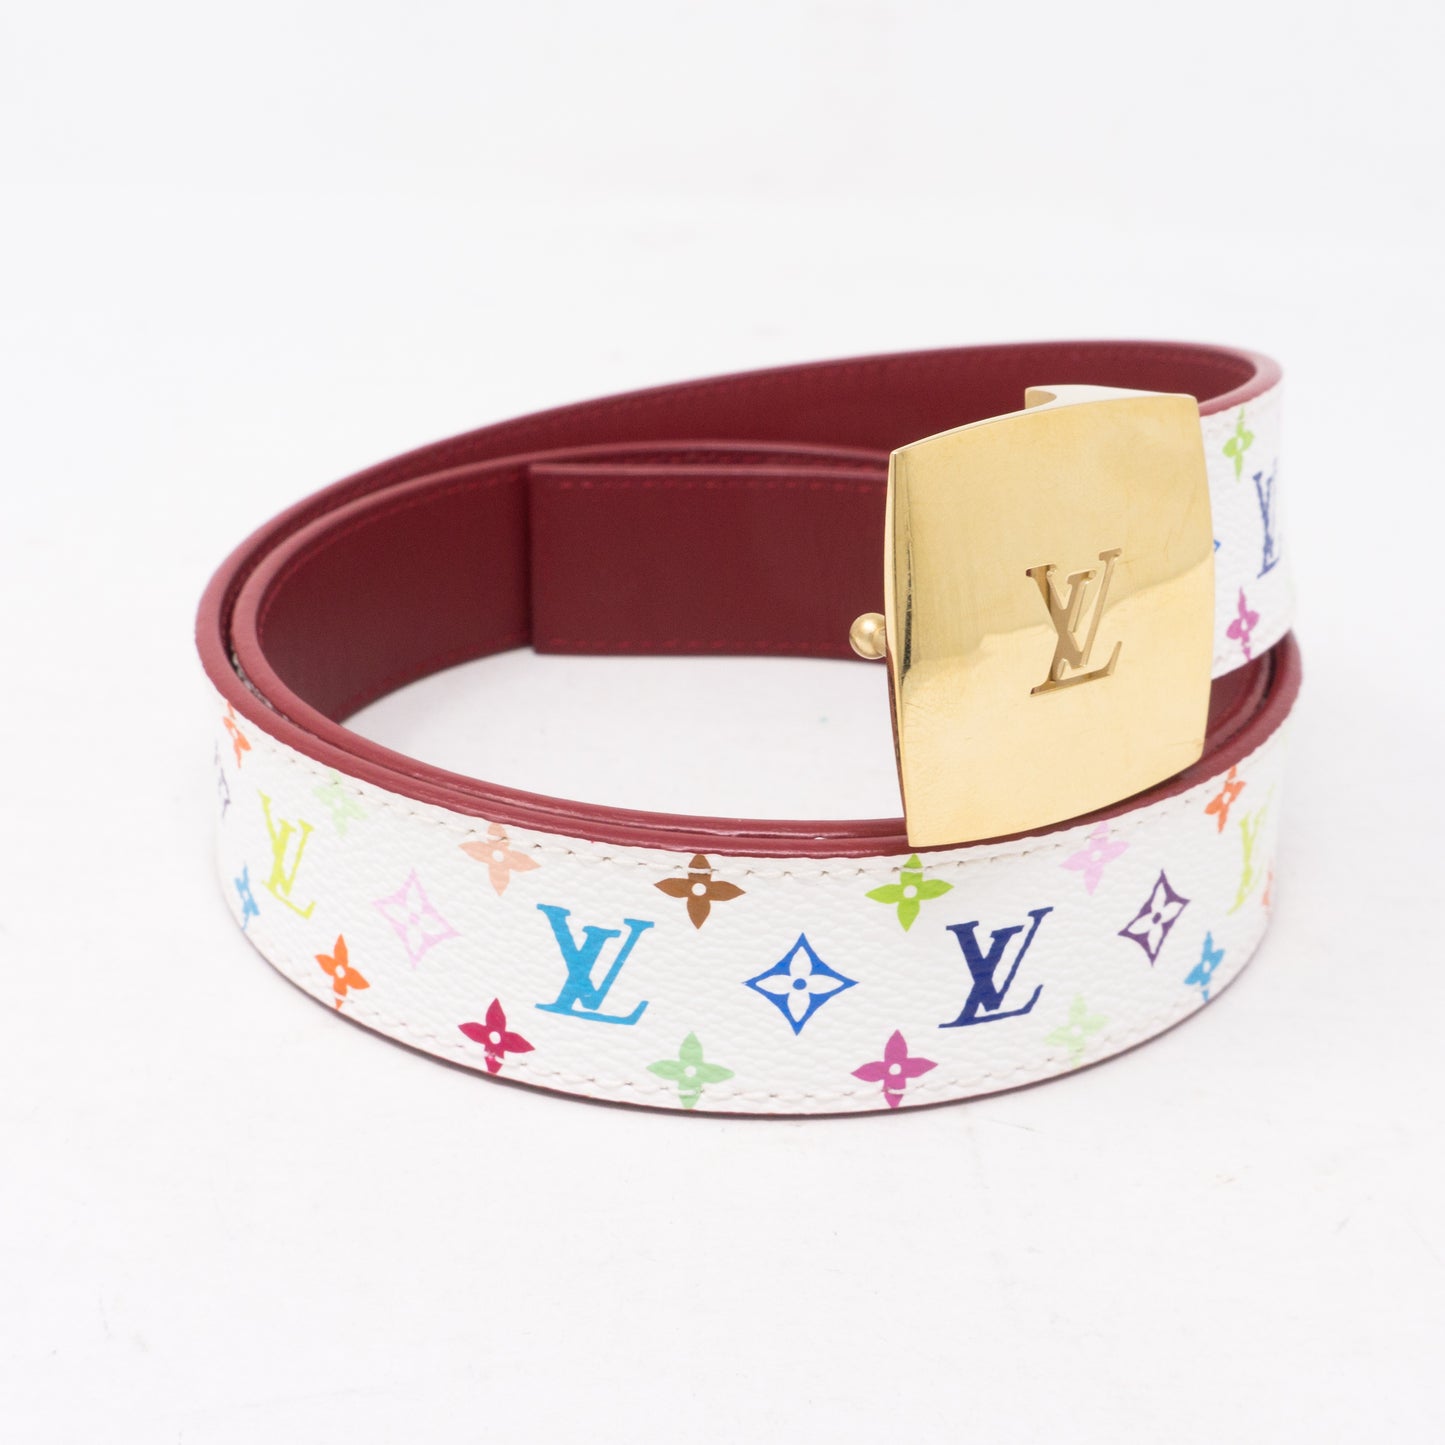 Louis Vuitton Belt Dying, resist, cutout and sewing #withGodallthingsa